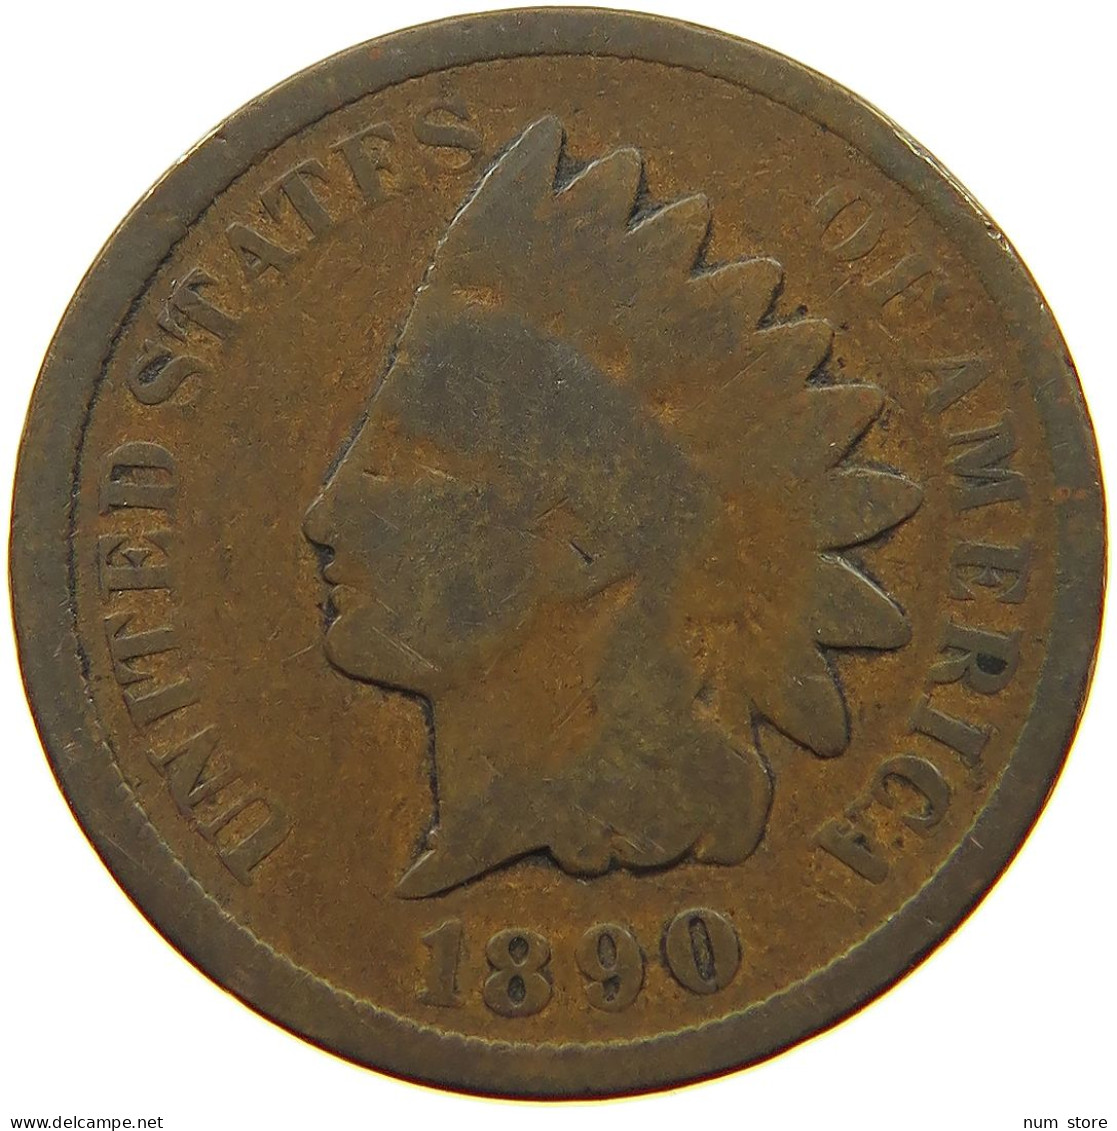 UNITED STATES OF AMERICA CENT 1890 INDIAN HEAD #s063 0061 - 1859-1909: Indian Head